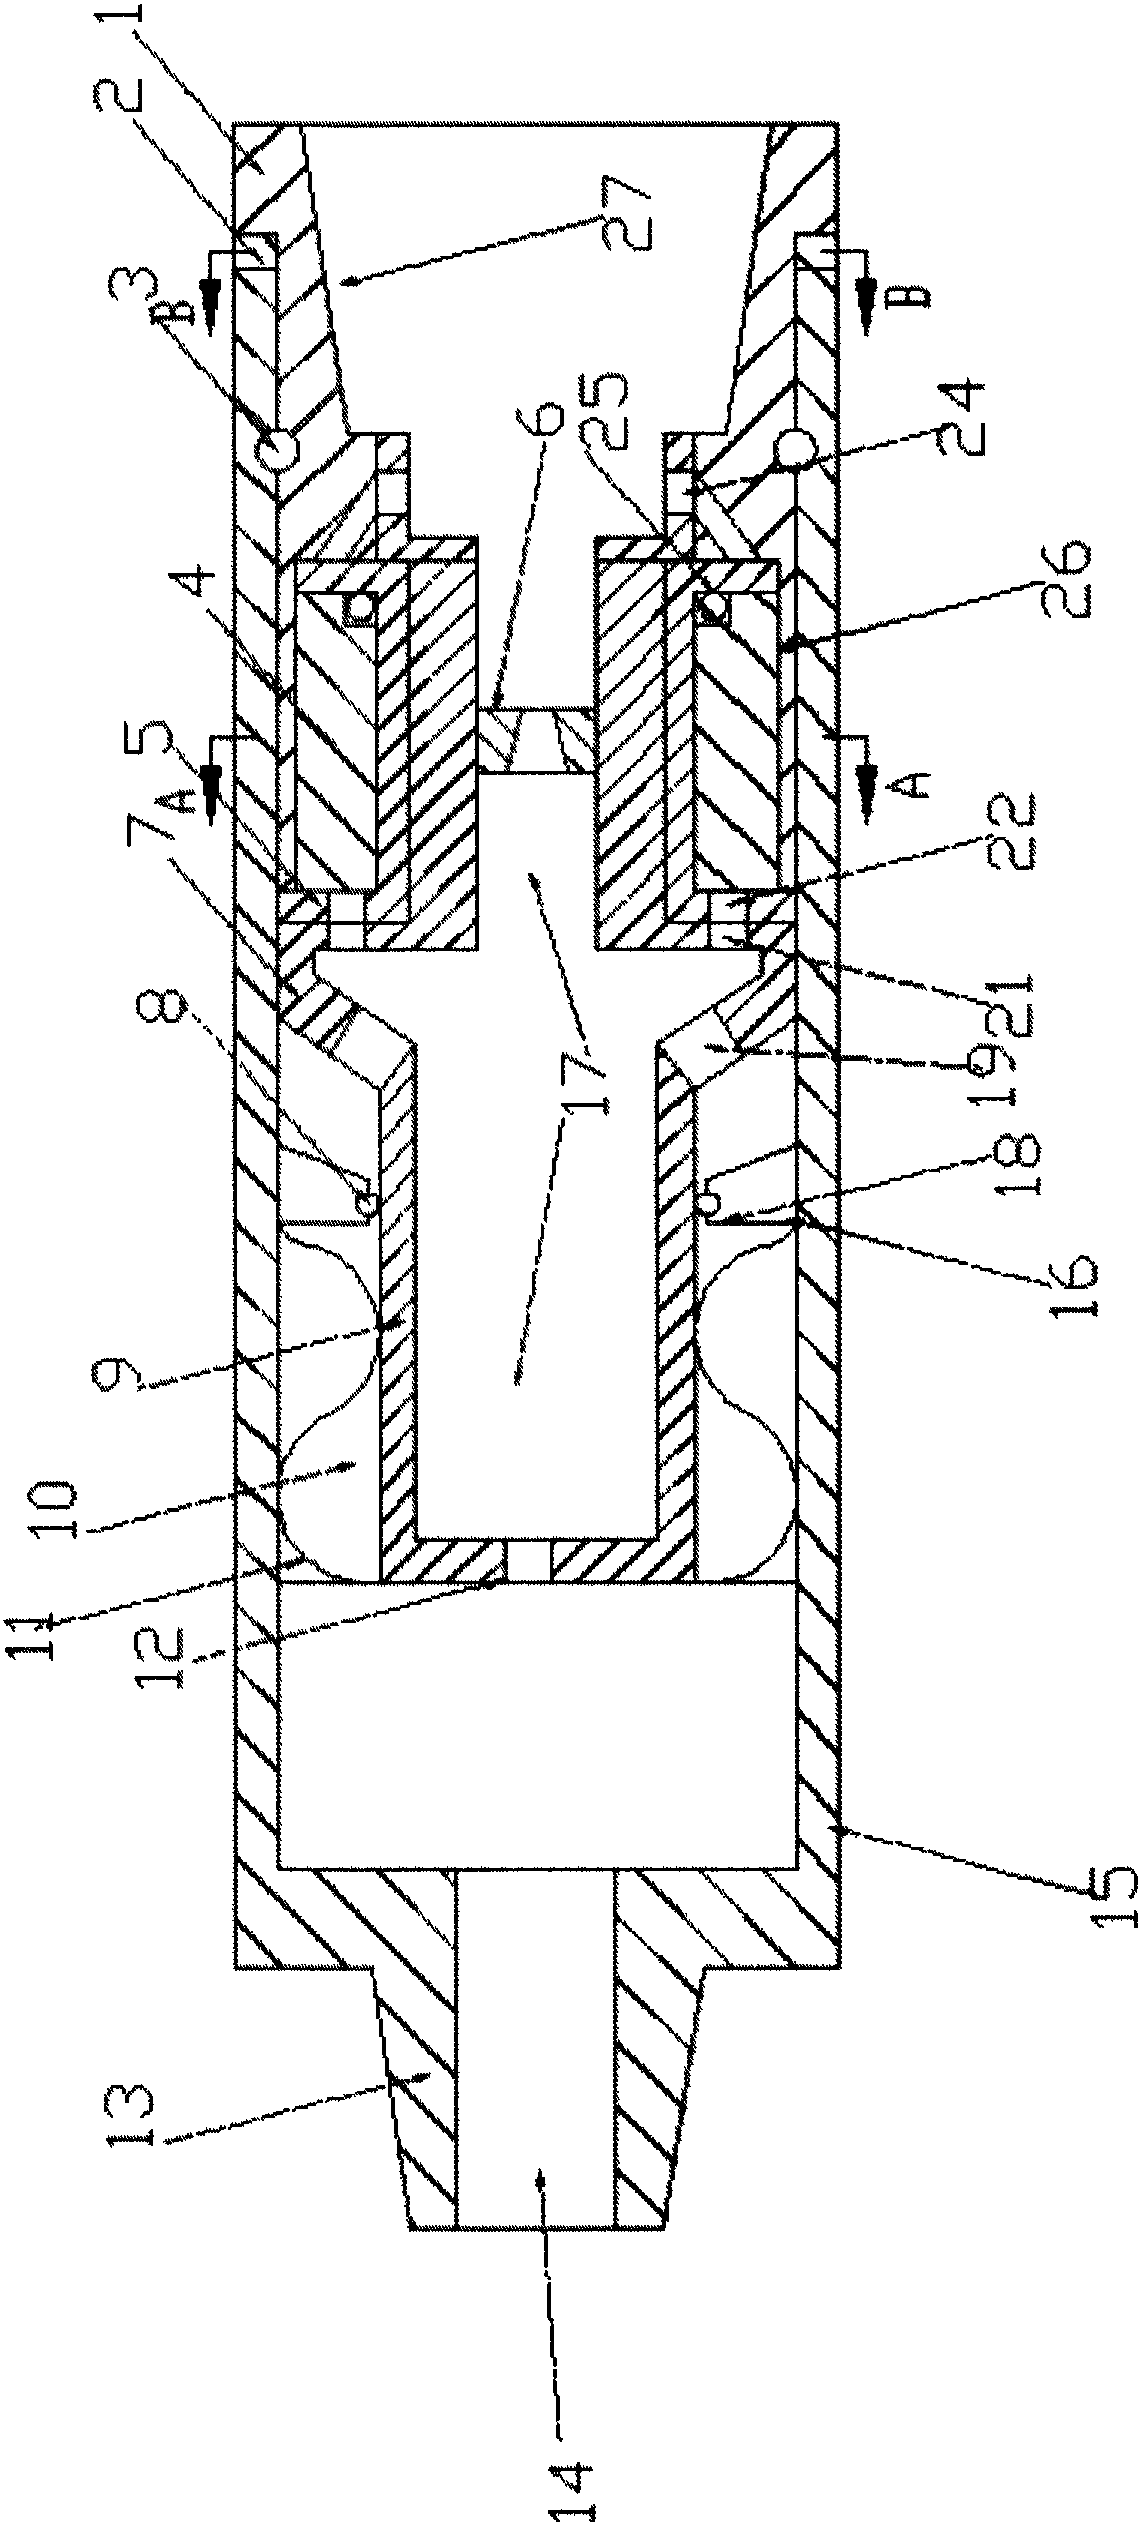 Realization method and structure of a rotary valve reversing type hydrodynamic circumferential impactor